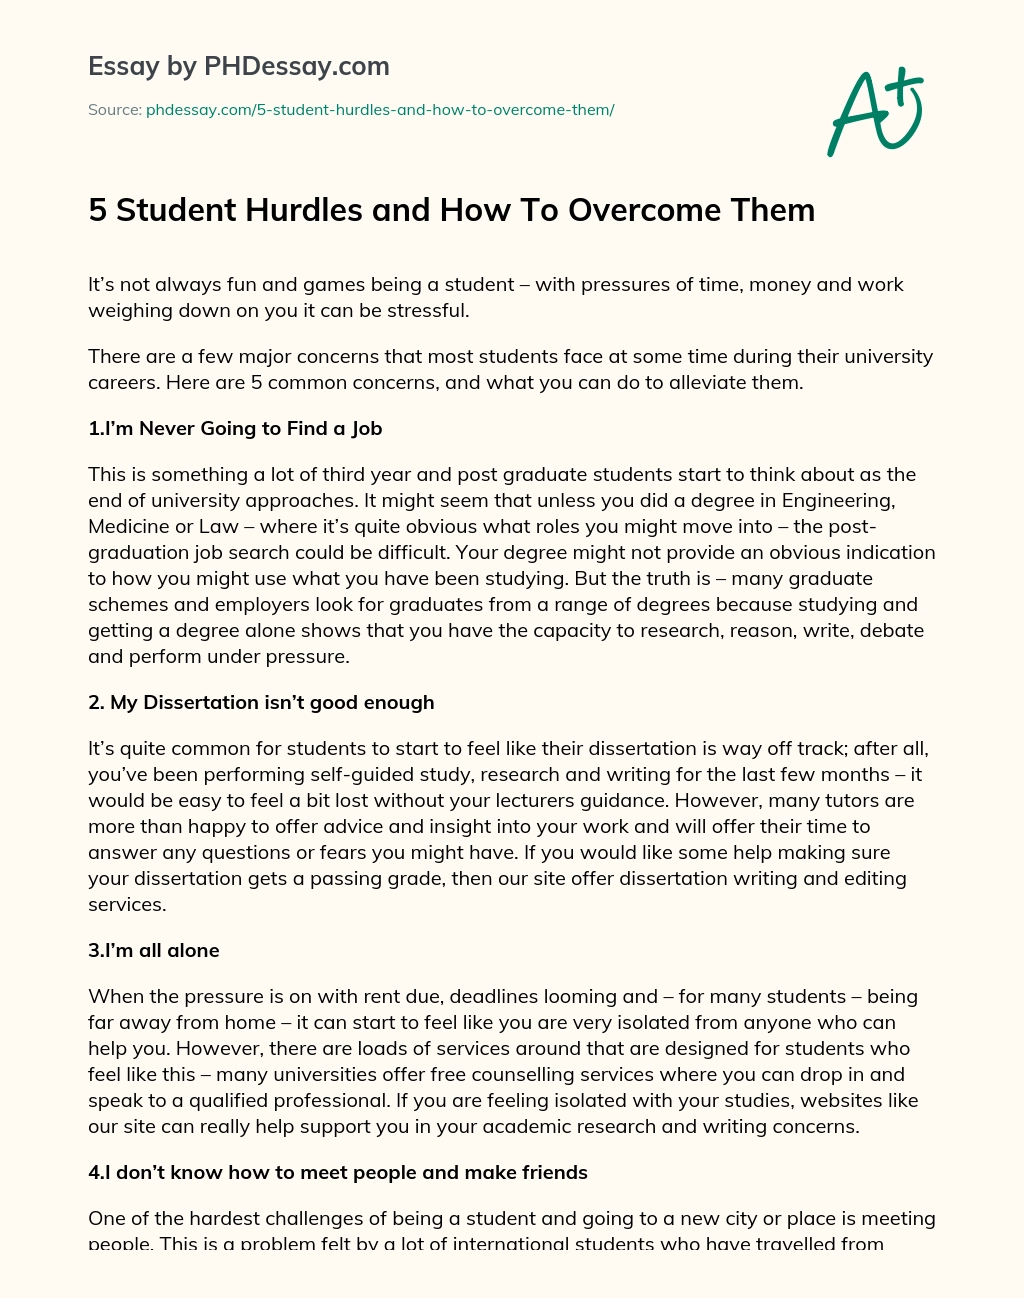 5 Student Hurdles and How To Overcome Them essay